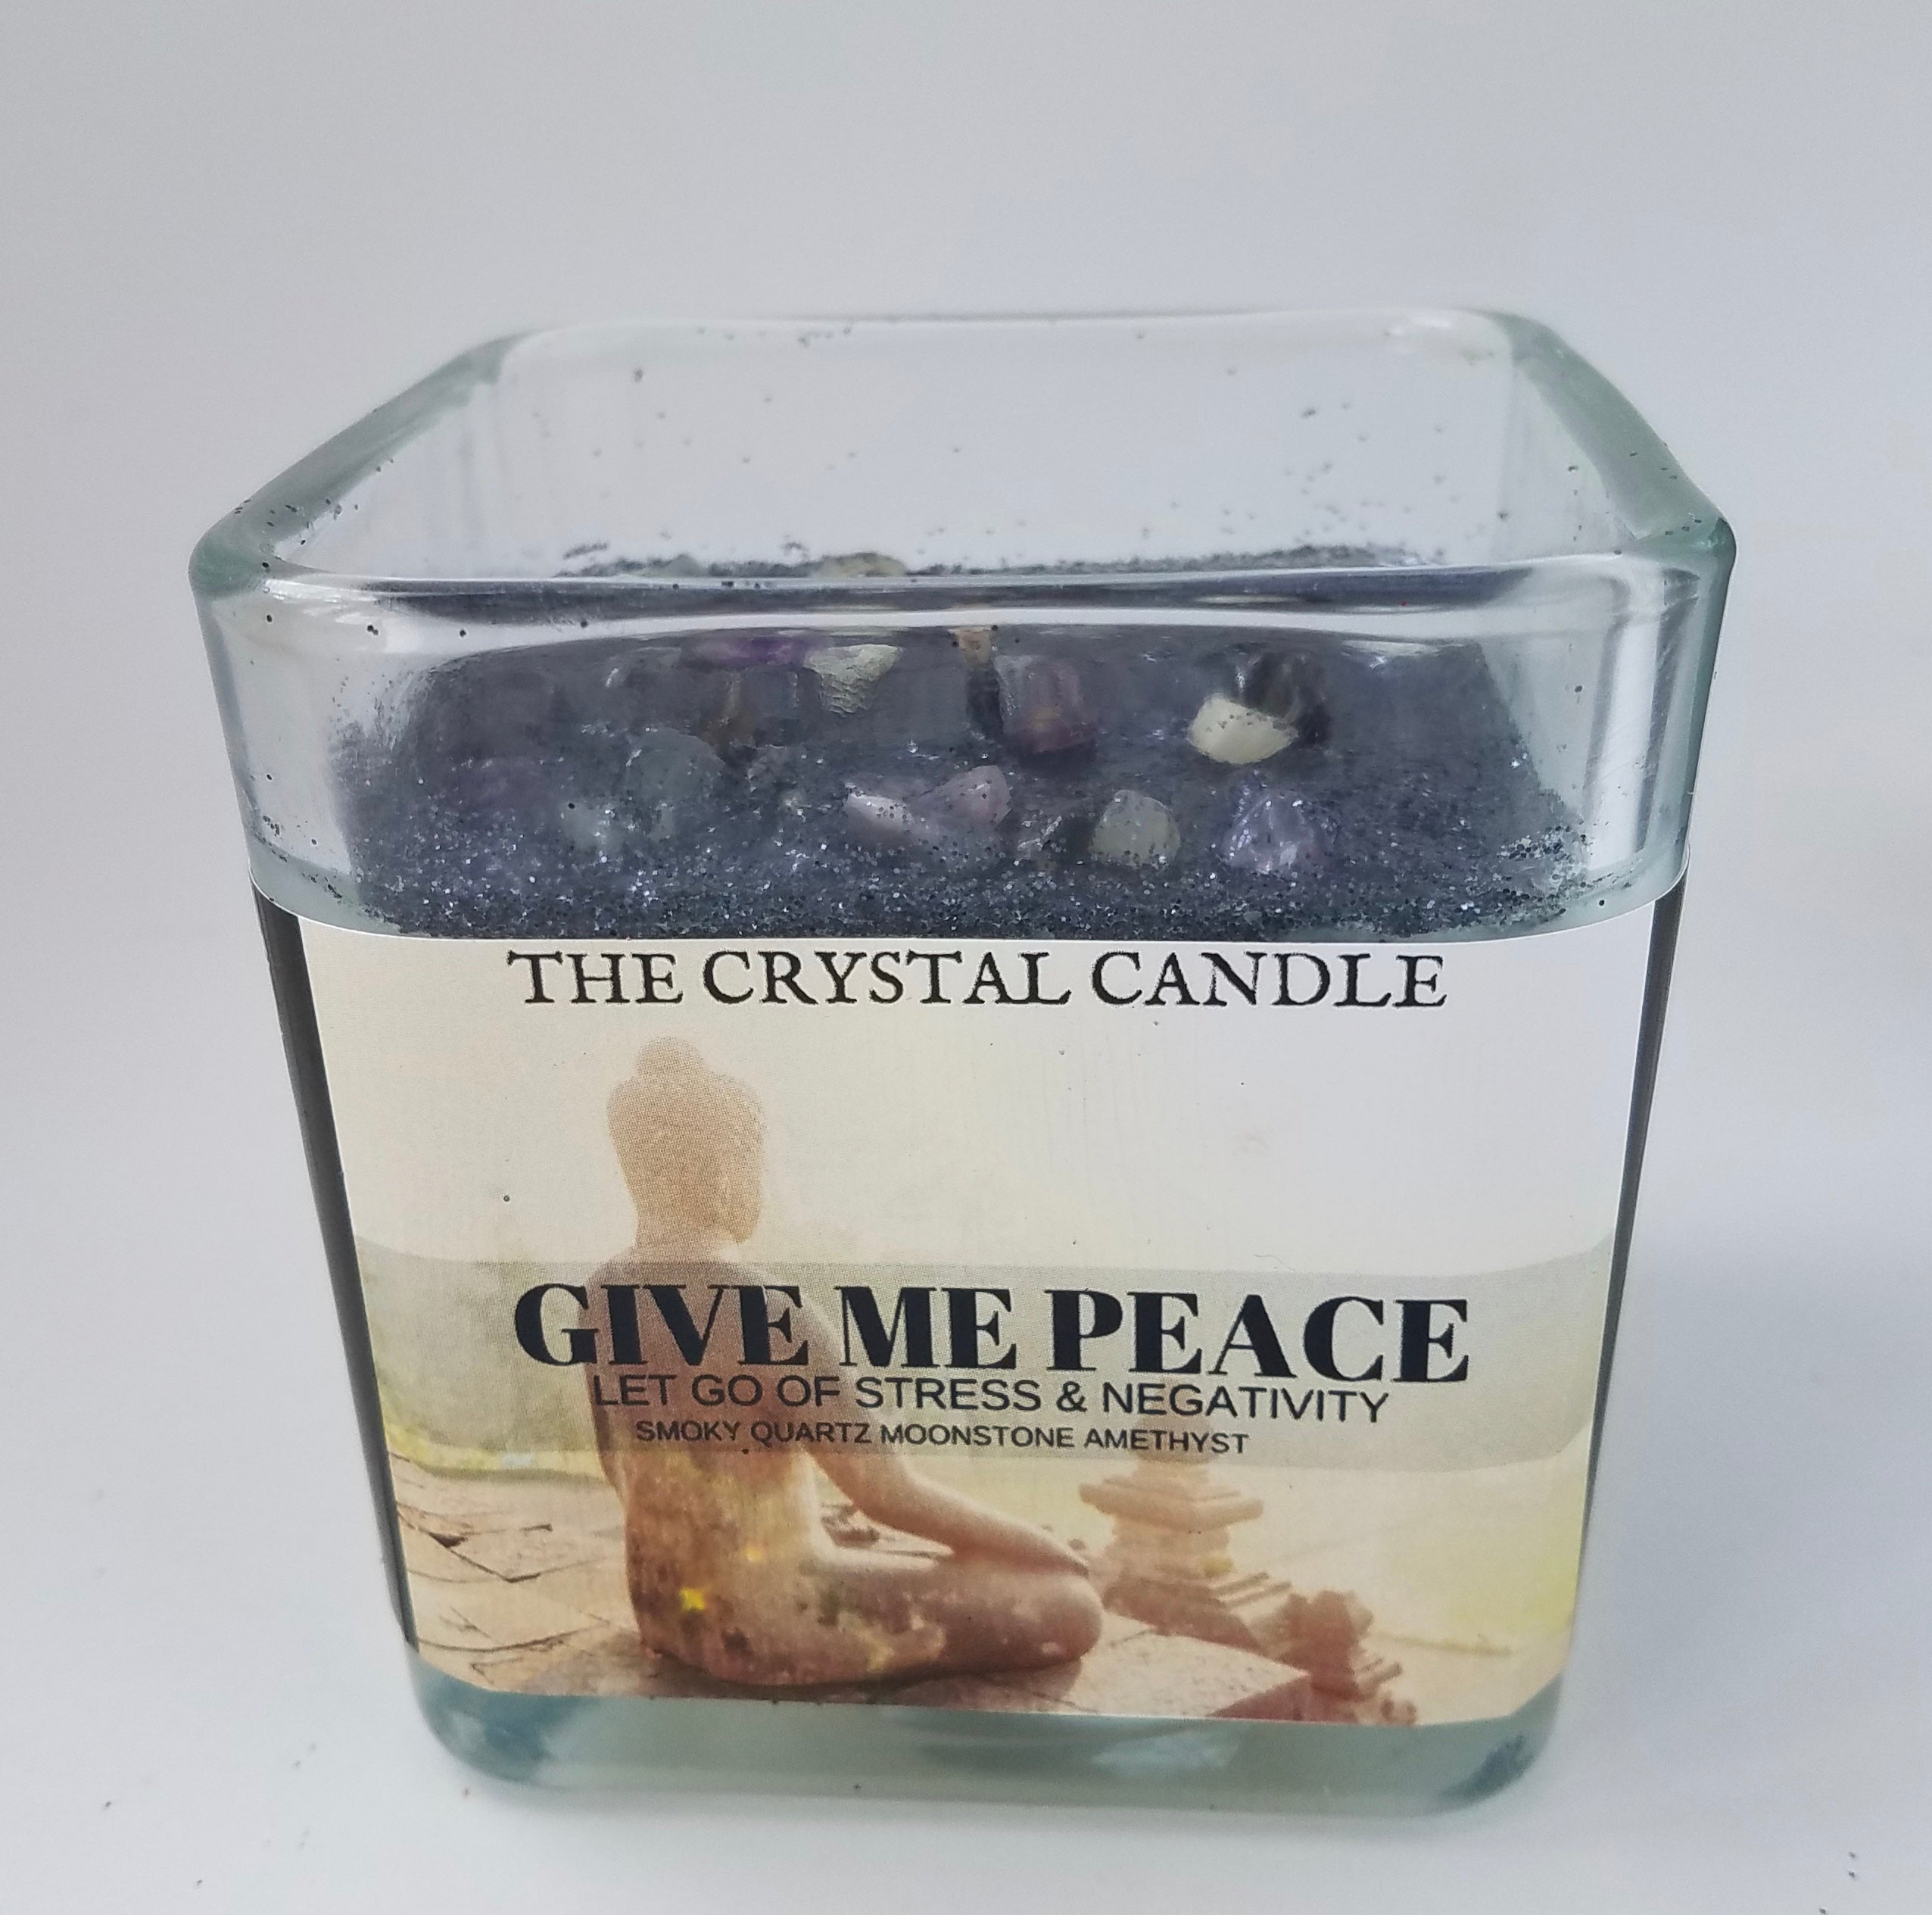 Give Me Peace- Candle To Let Go Of Stress & Negativity